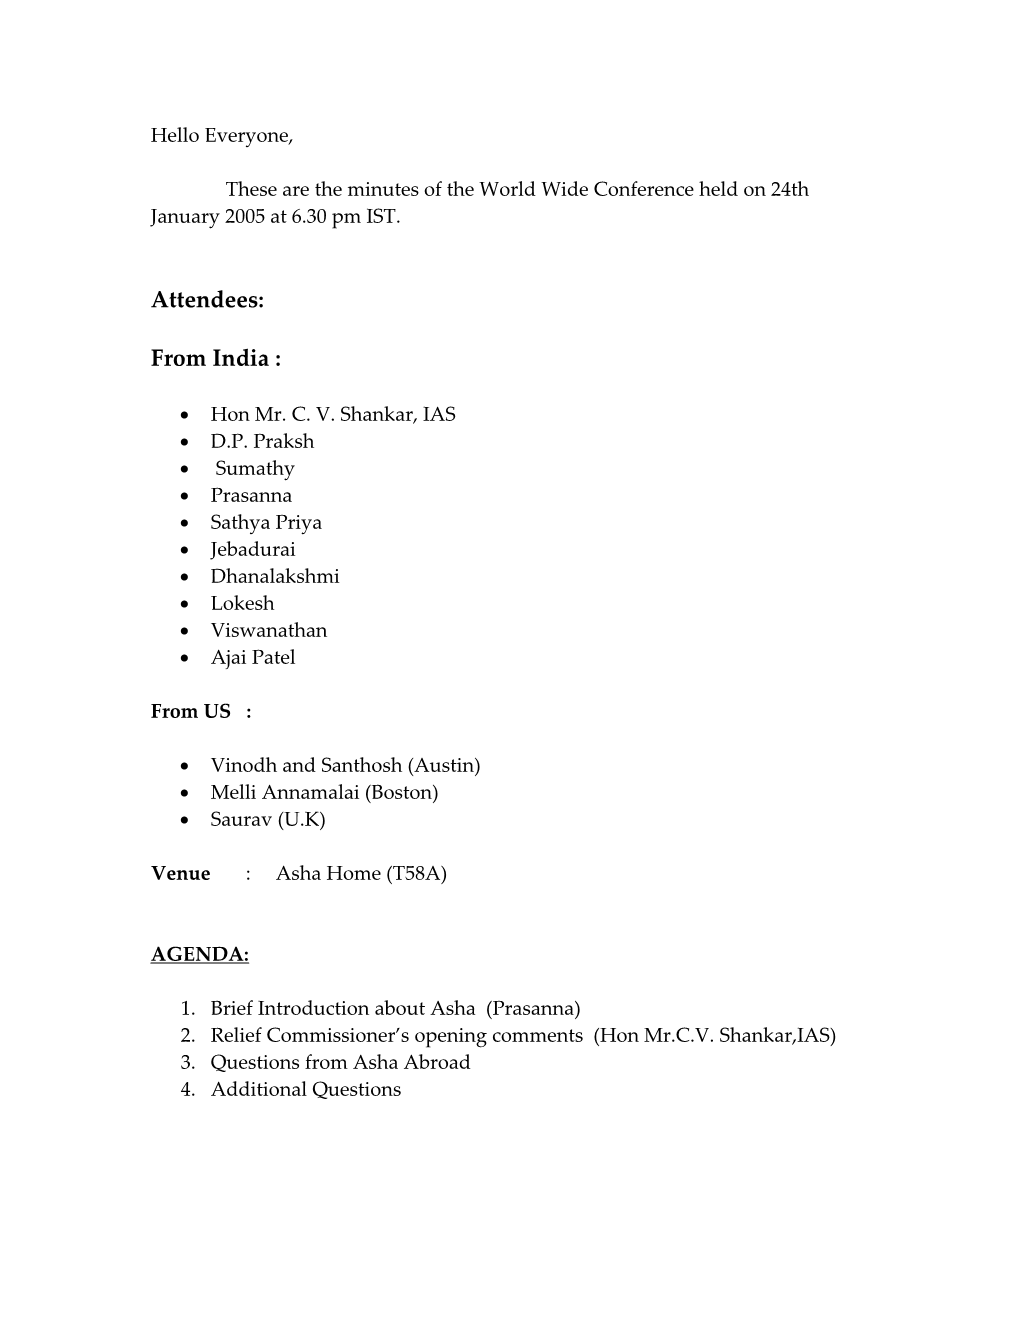 These Are the Minutes of the World Wide Conference Held on 24Th January 2005 at 6.30 Pm IST